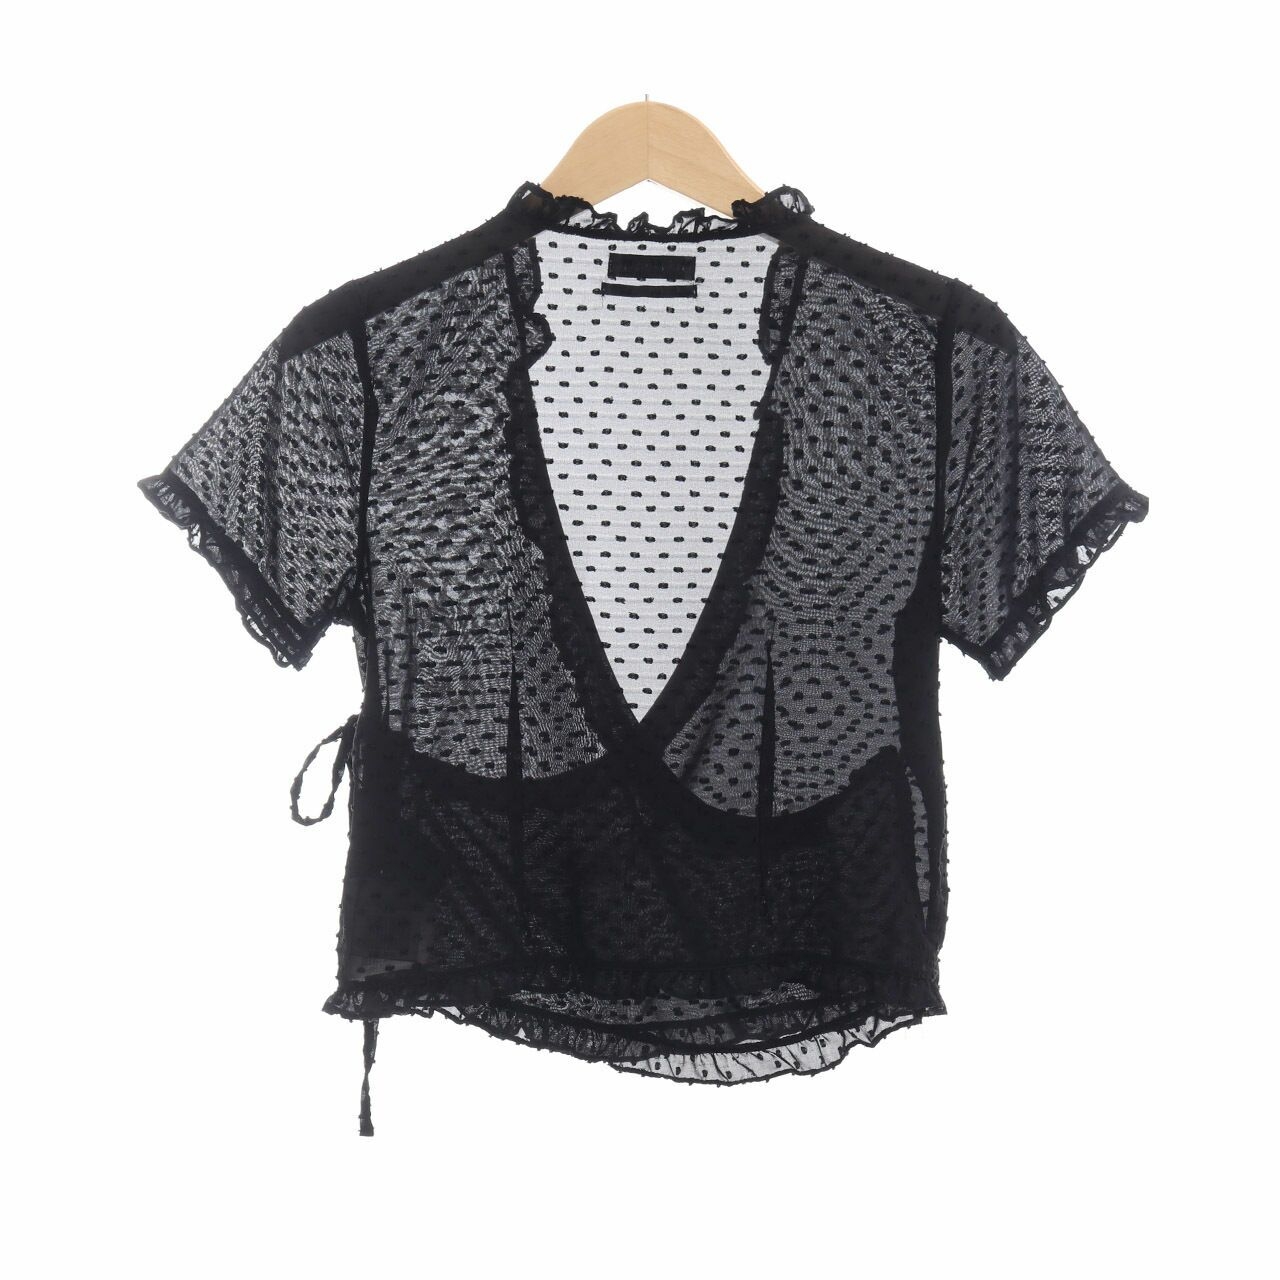 Urban Outfitters Black Wrap Blouse